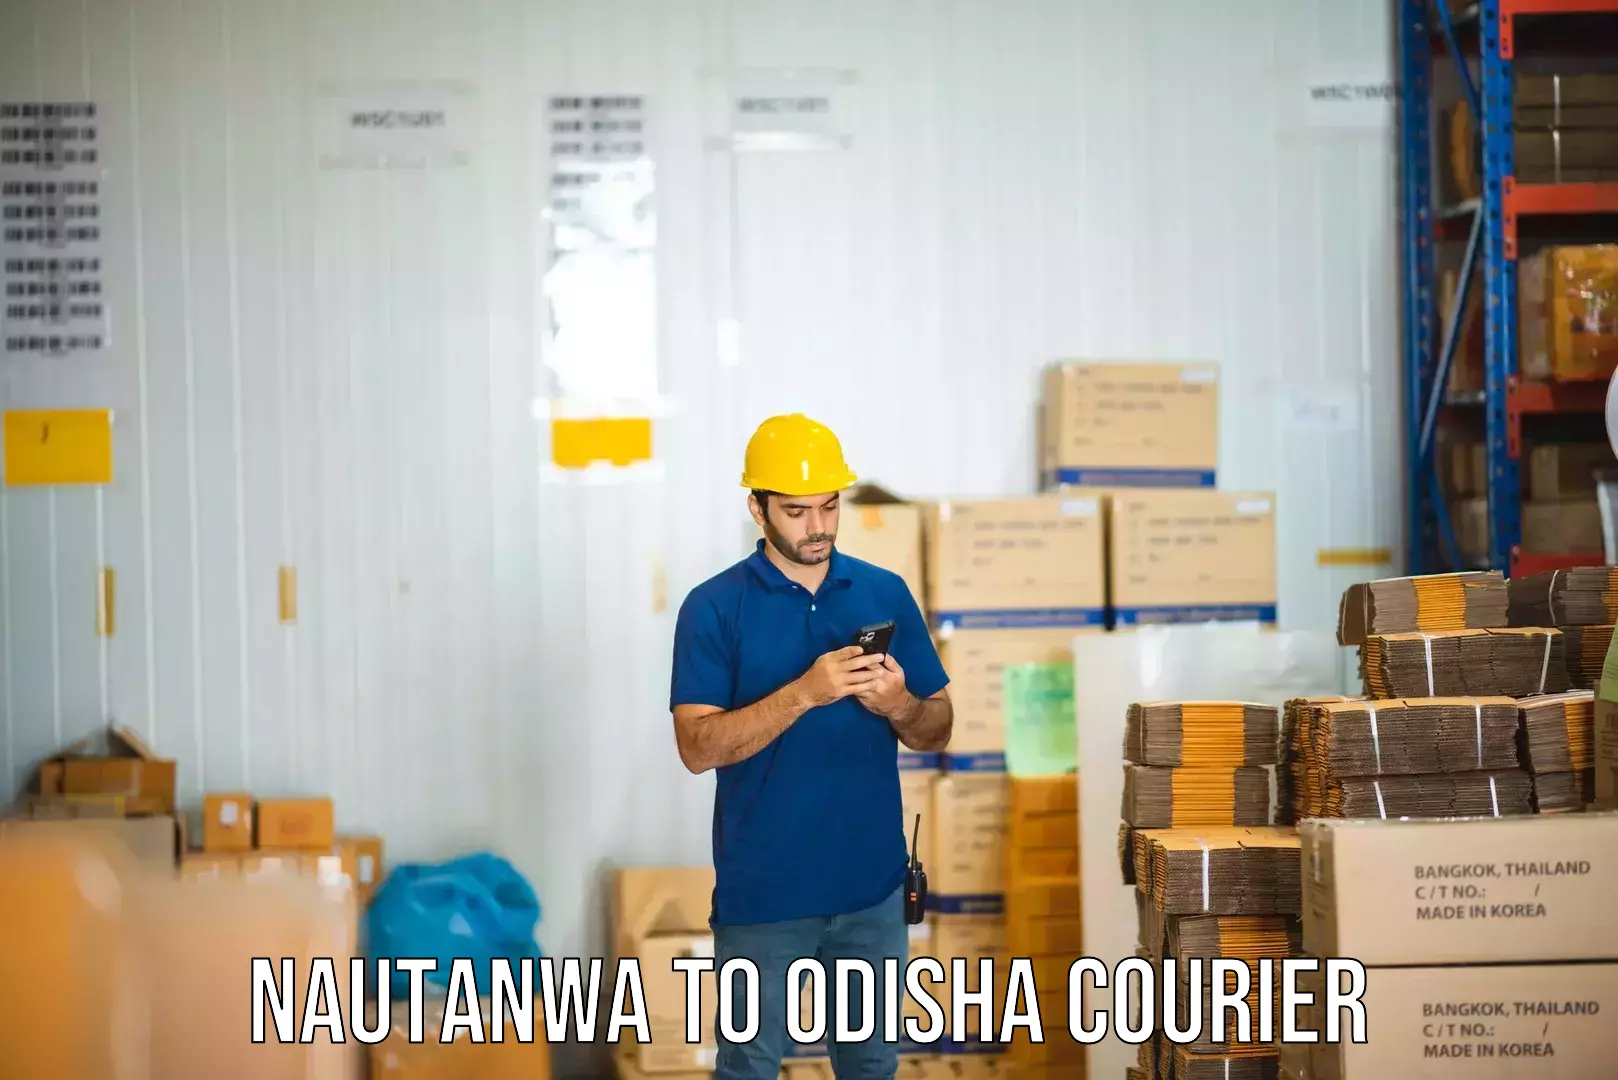 State-of-the-art courier technology Nautanwa to Kalimela